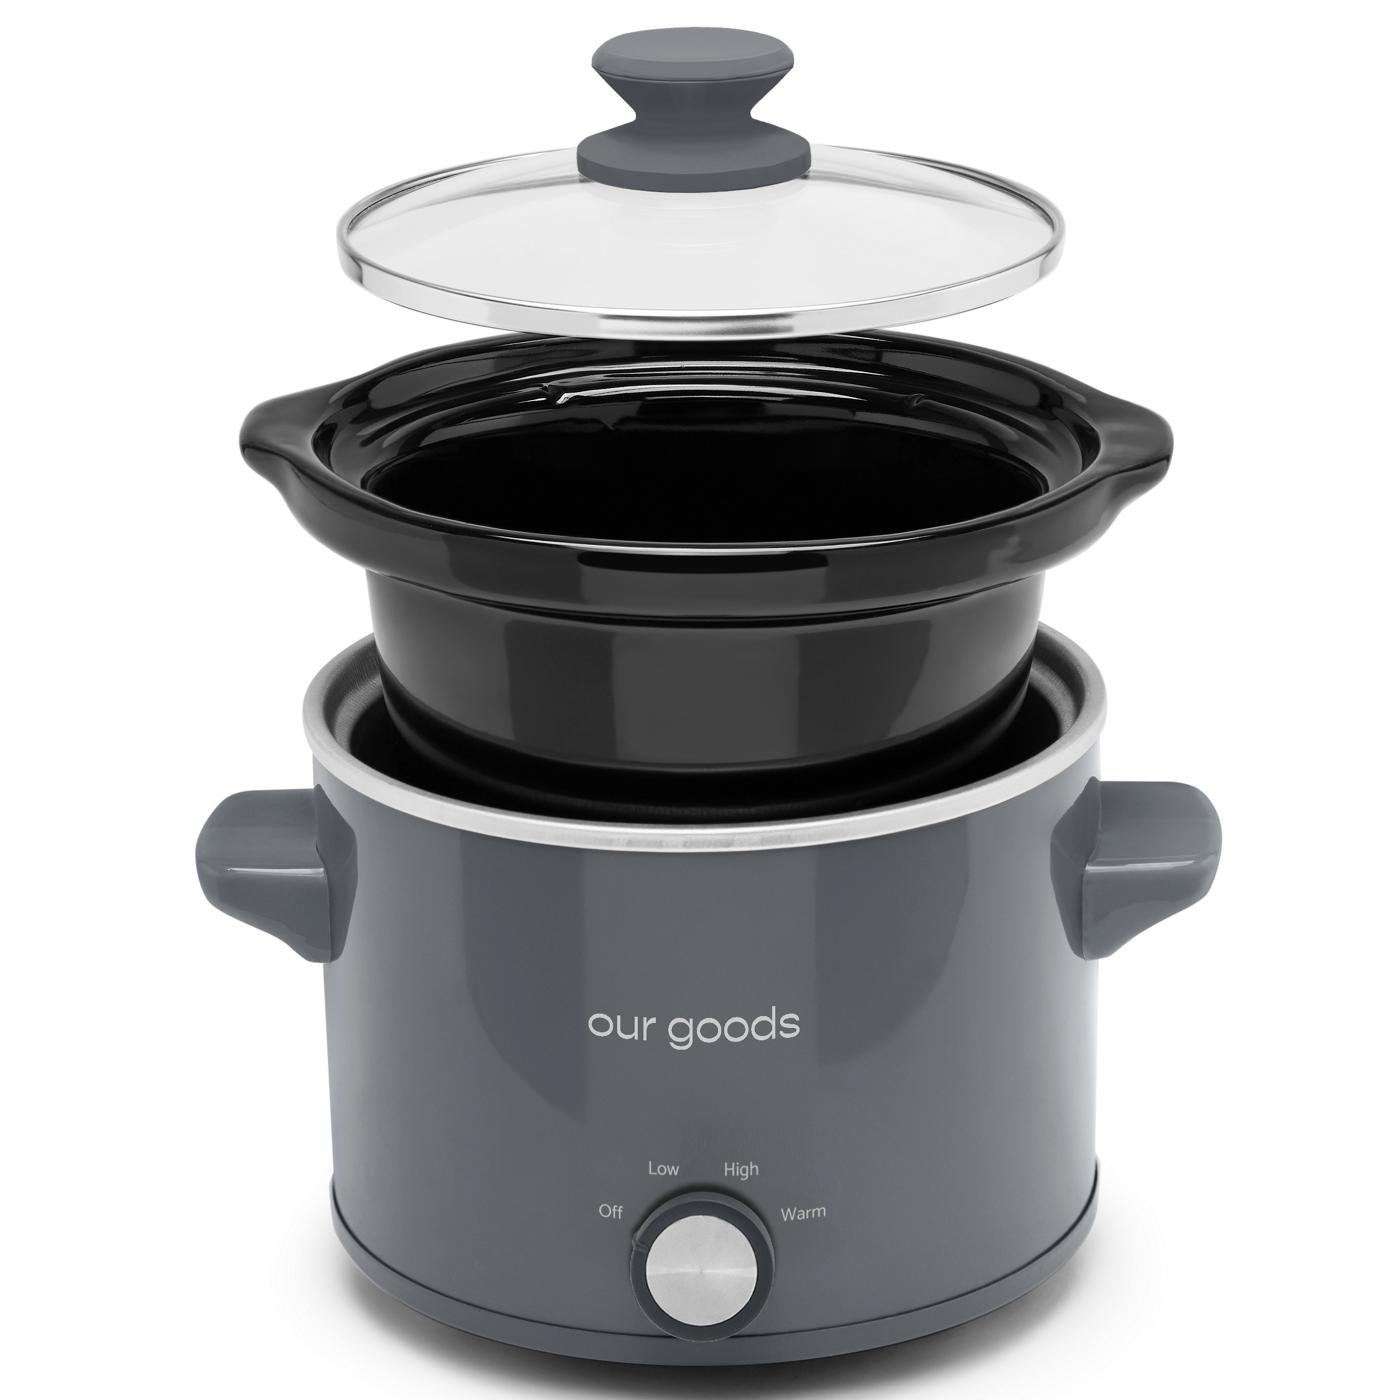 Crockpot Smart Pot With Locking Lid - Shop Cookers & Roasters at H-E-B